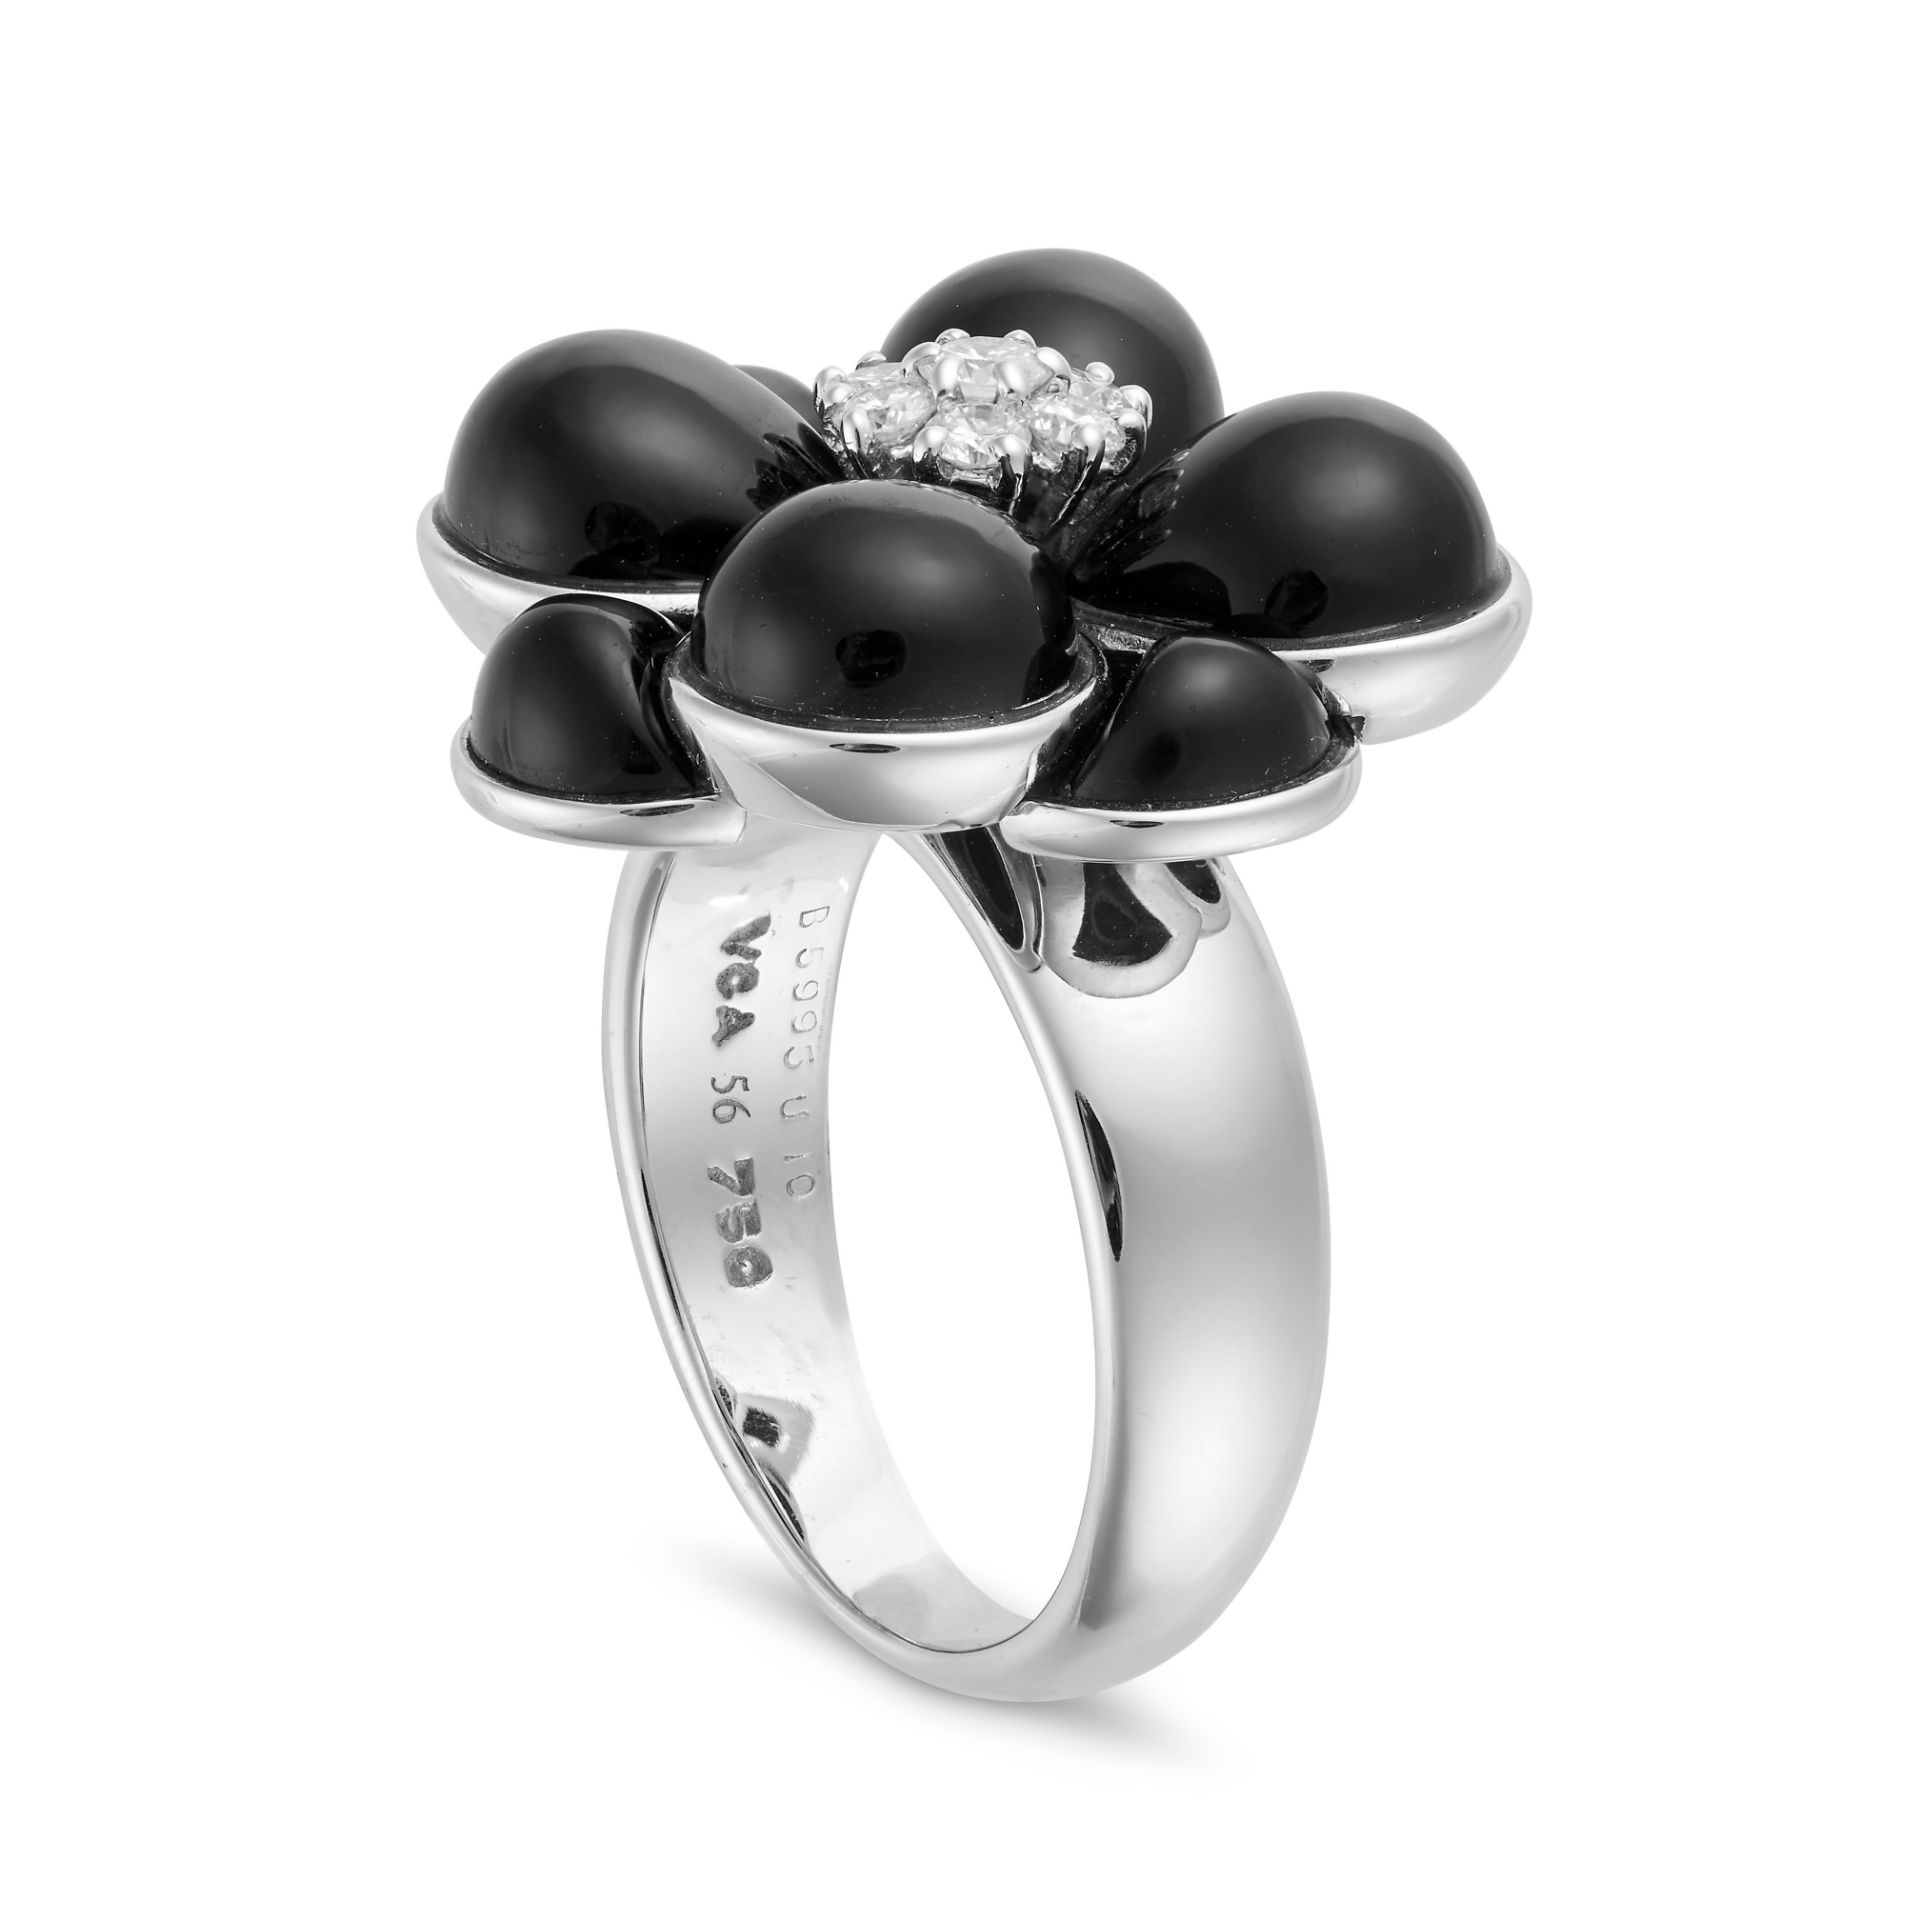 VAN CLEEF & ARPELS, A DIAMOND AND ENAMEL FLOWER RING designed as a flower set with polished onyx ... - Bild 2 aus 2